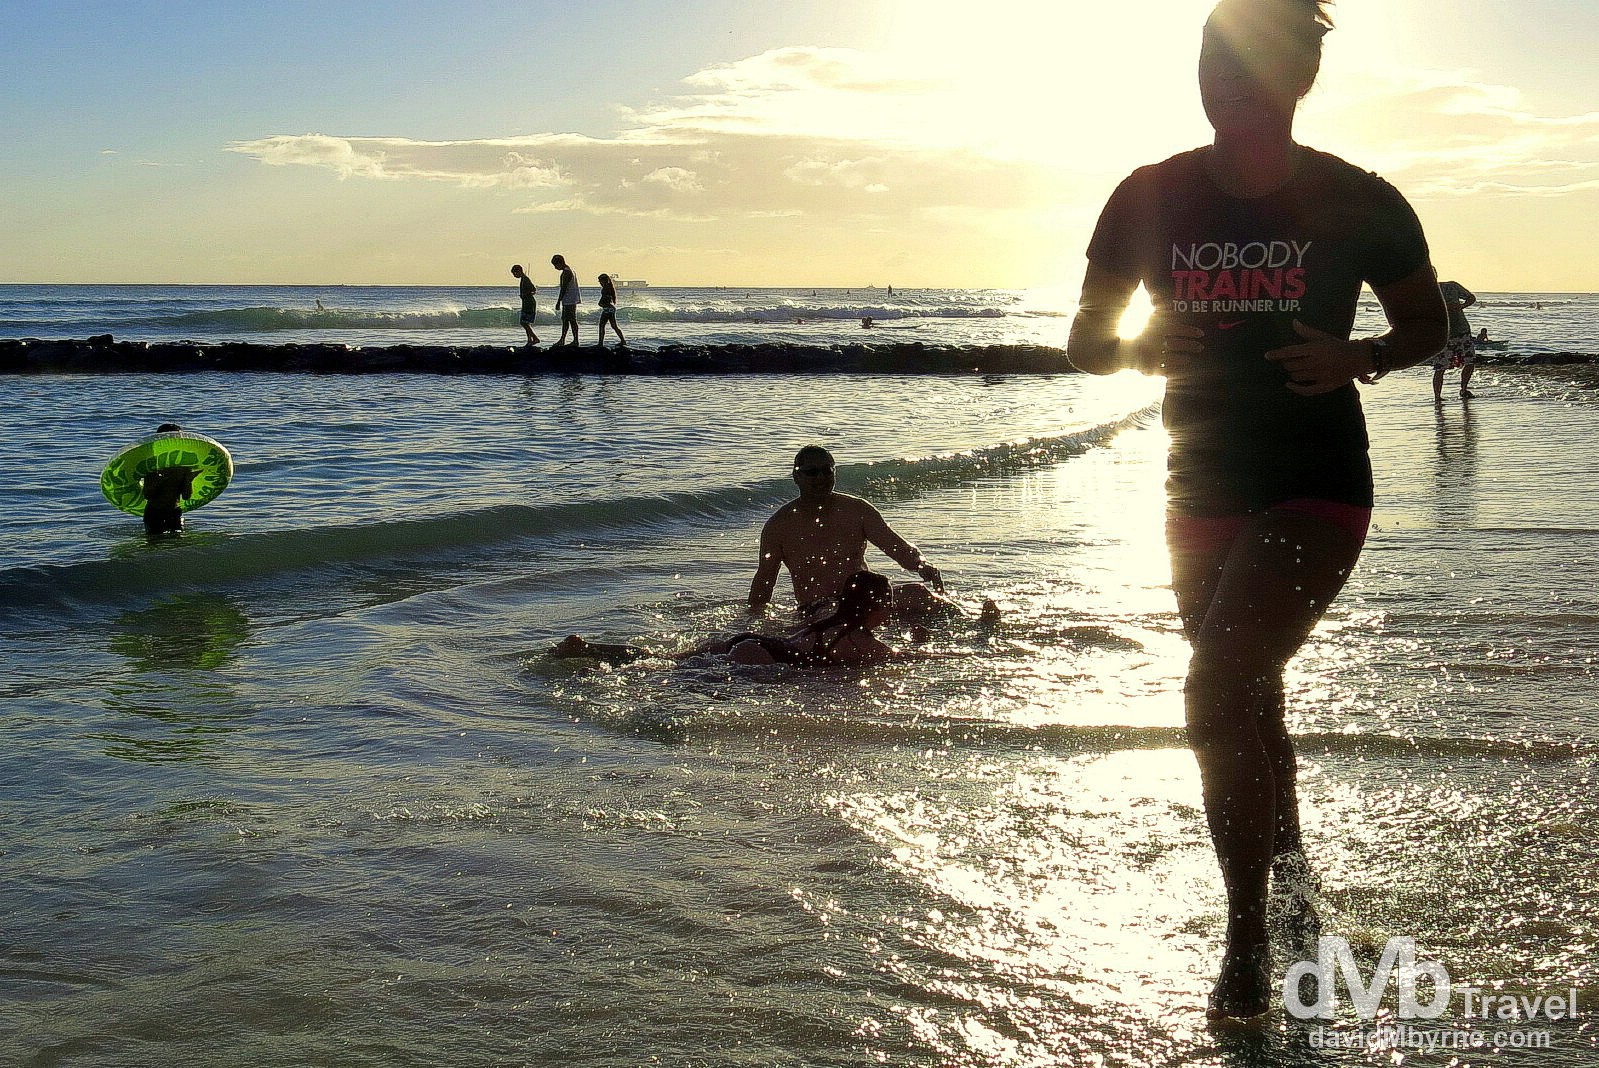 Nobody Trains To Be Runner Up. Late afternoon activity on Waikiki Beach, O'ahu, Hawaii. February 26th 2013.